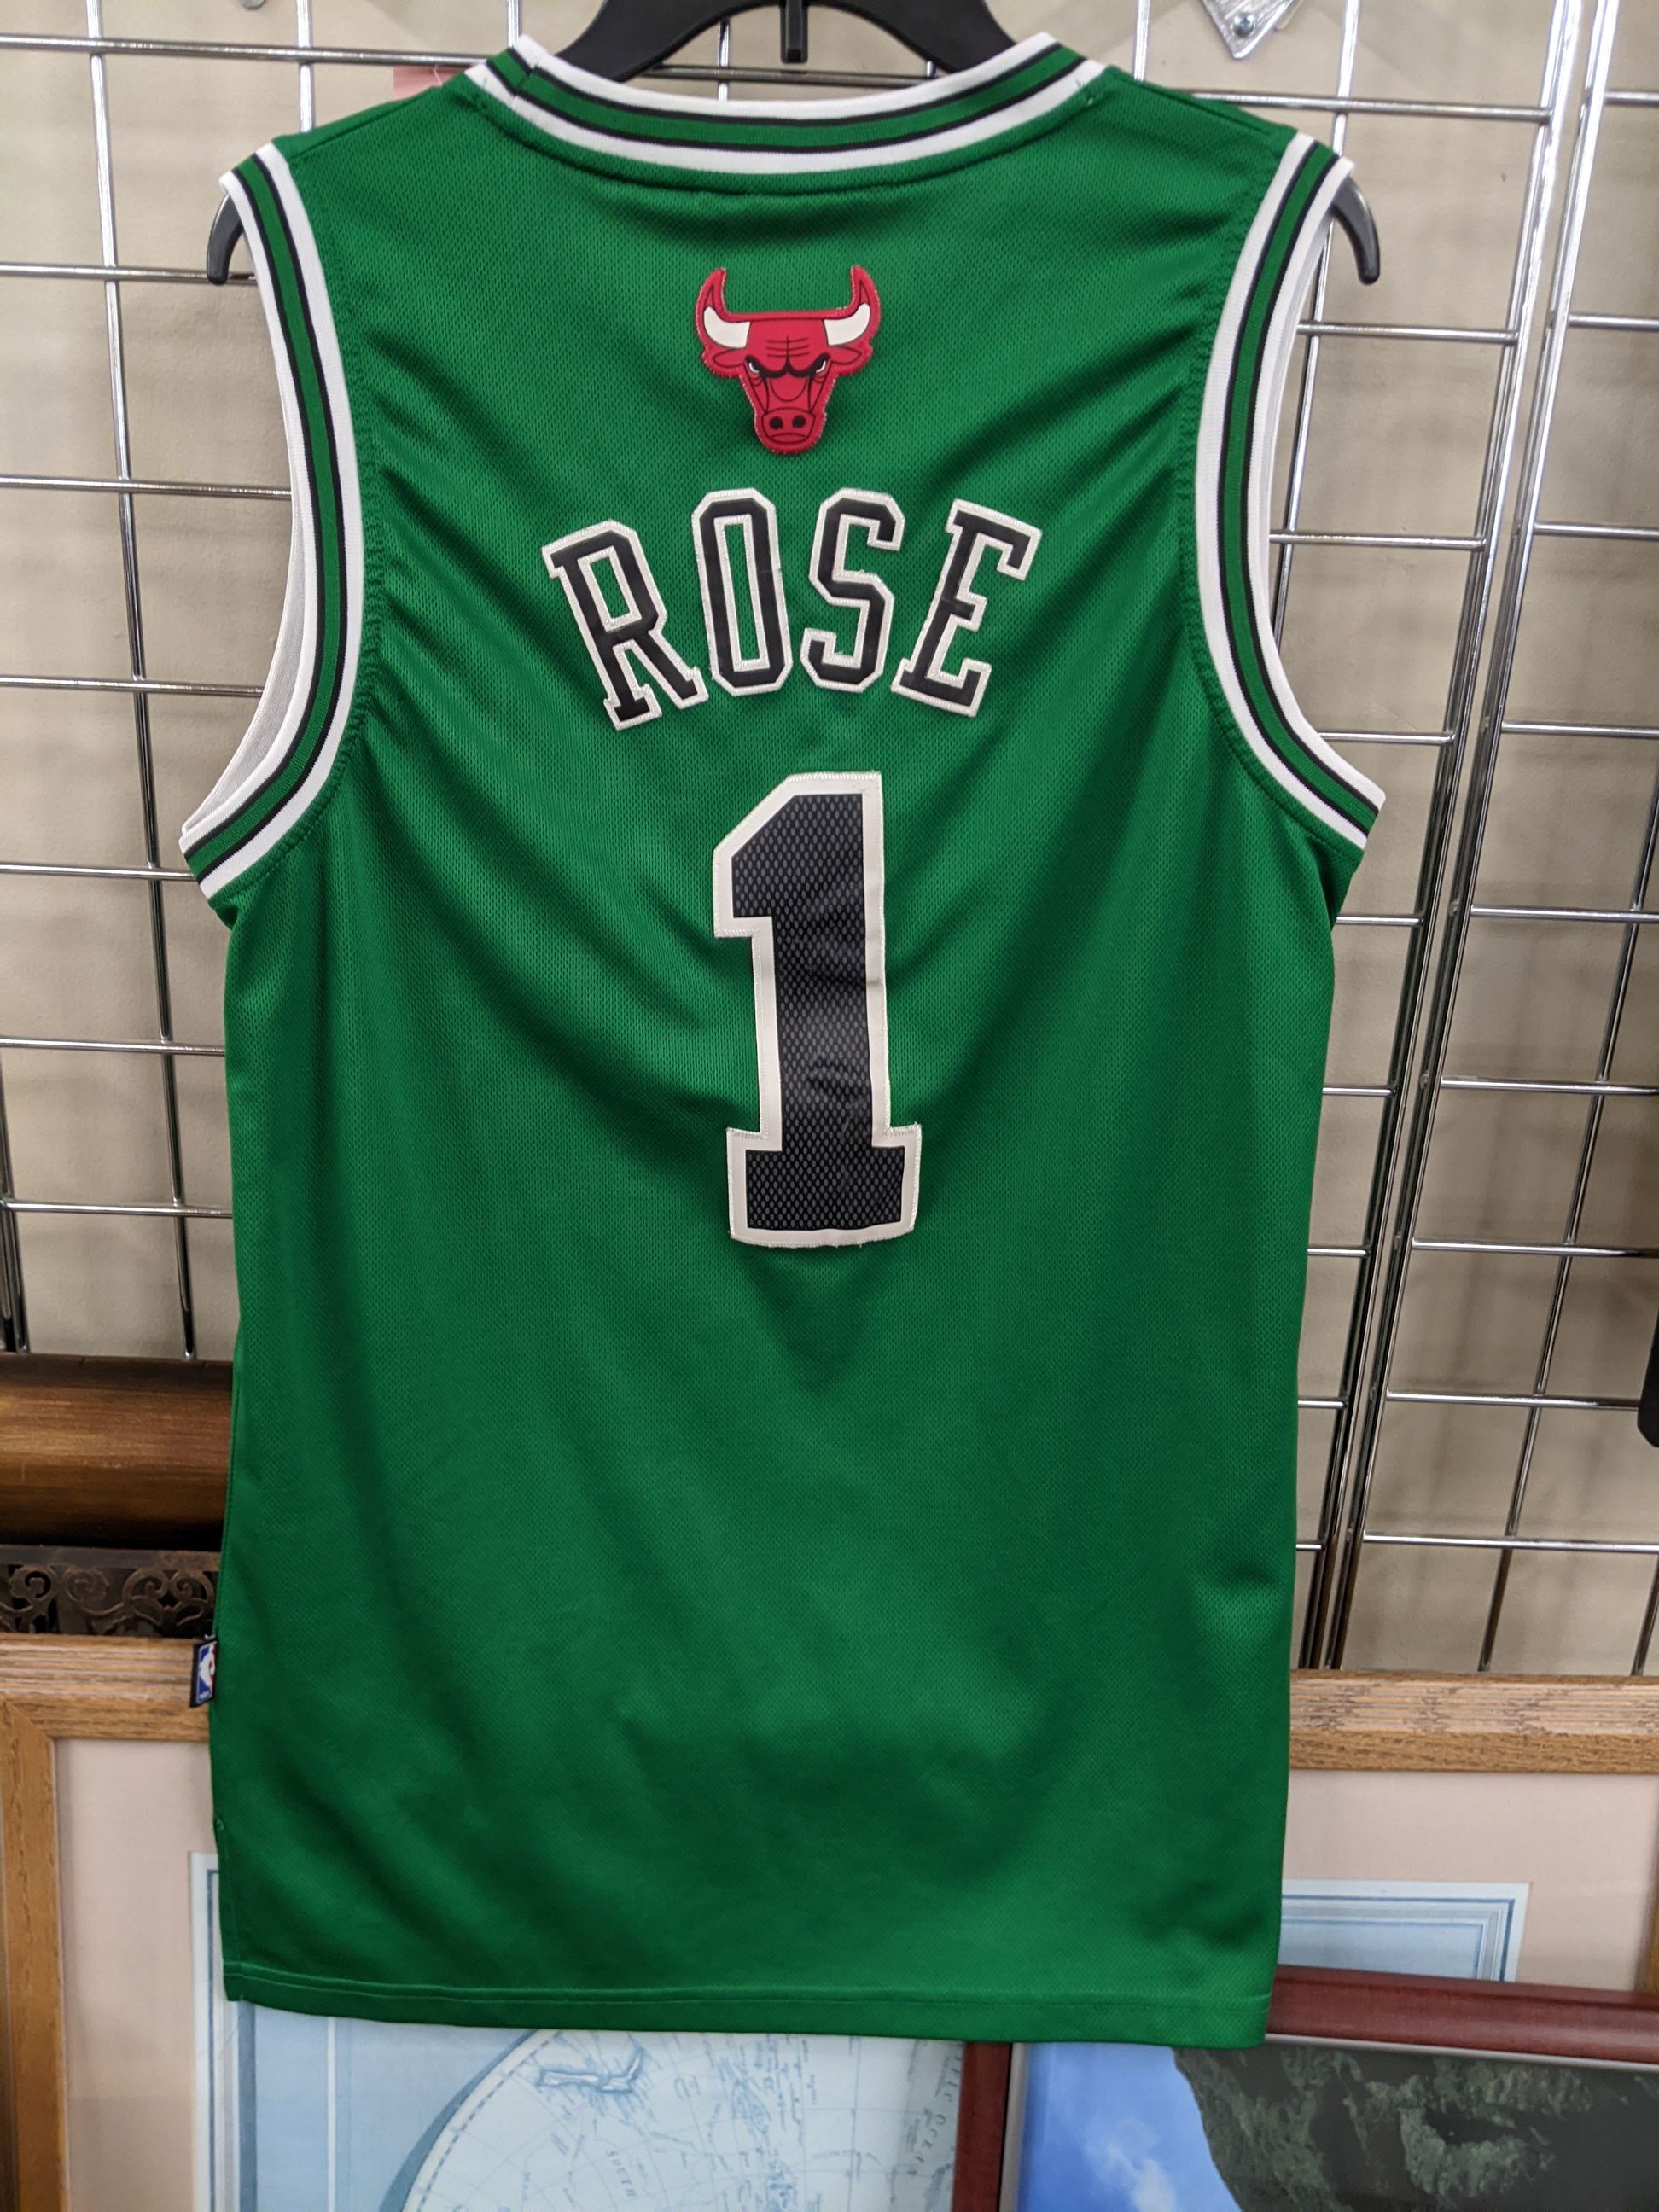 Adidas Adidas Derick Rose St. Patrick's Day Chicago Bulls Jersey Size US S / EU 44-46 / 1 - 1 Preview